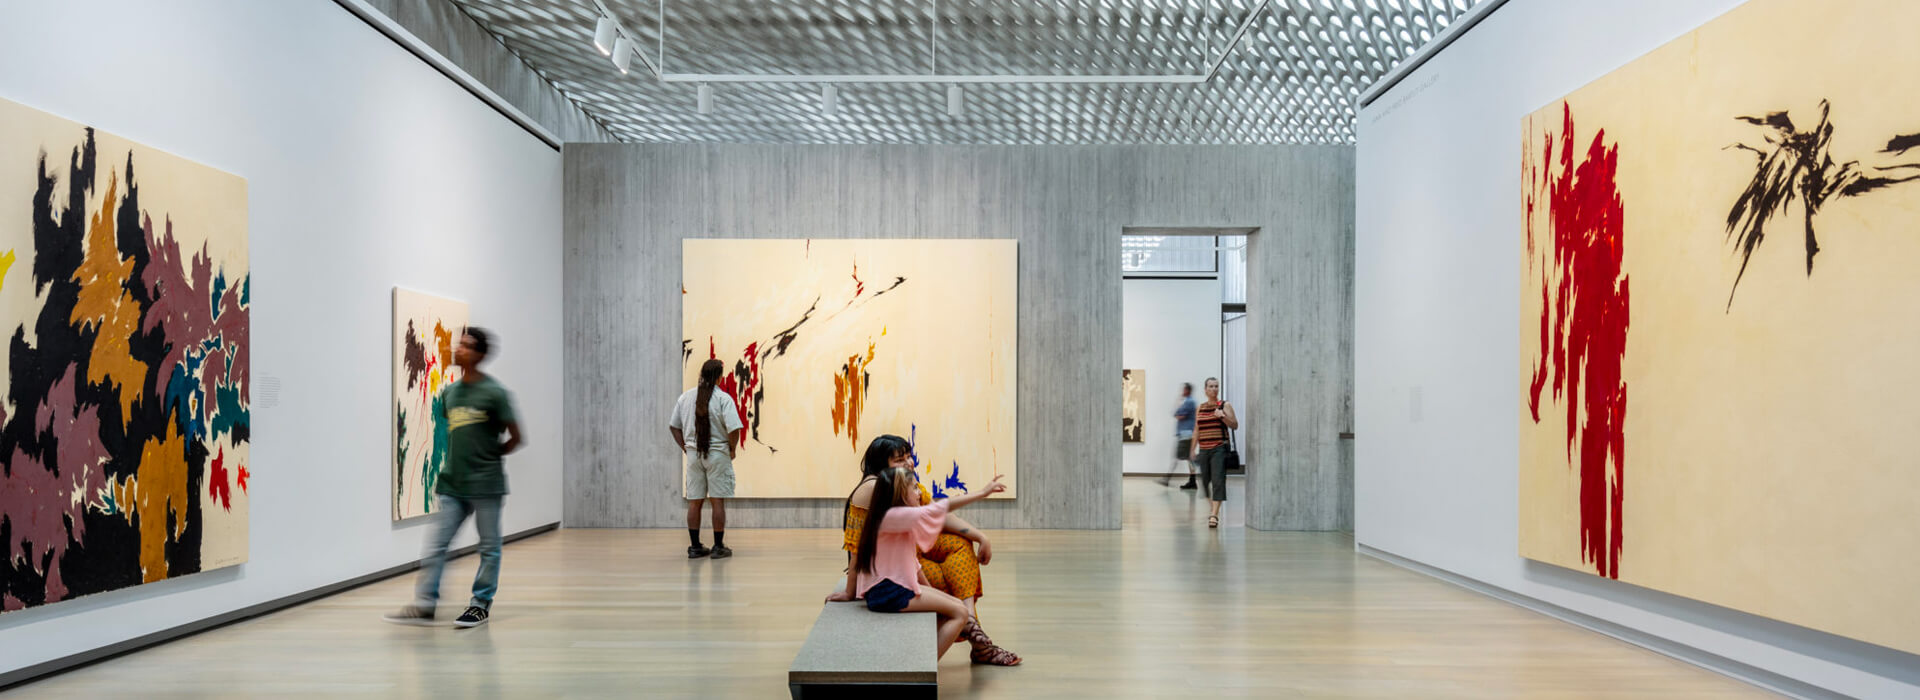 A mom and daughter sit on a bench while two men stand on the other side of the room looking at art